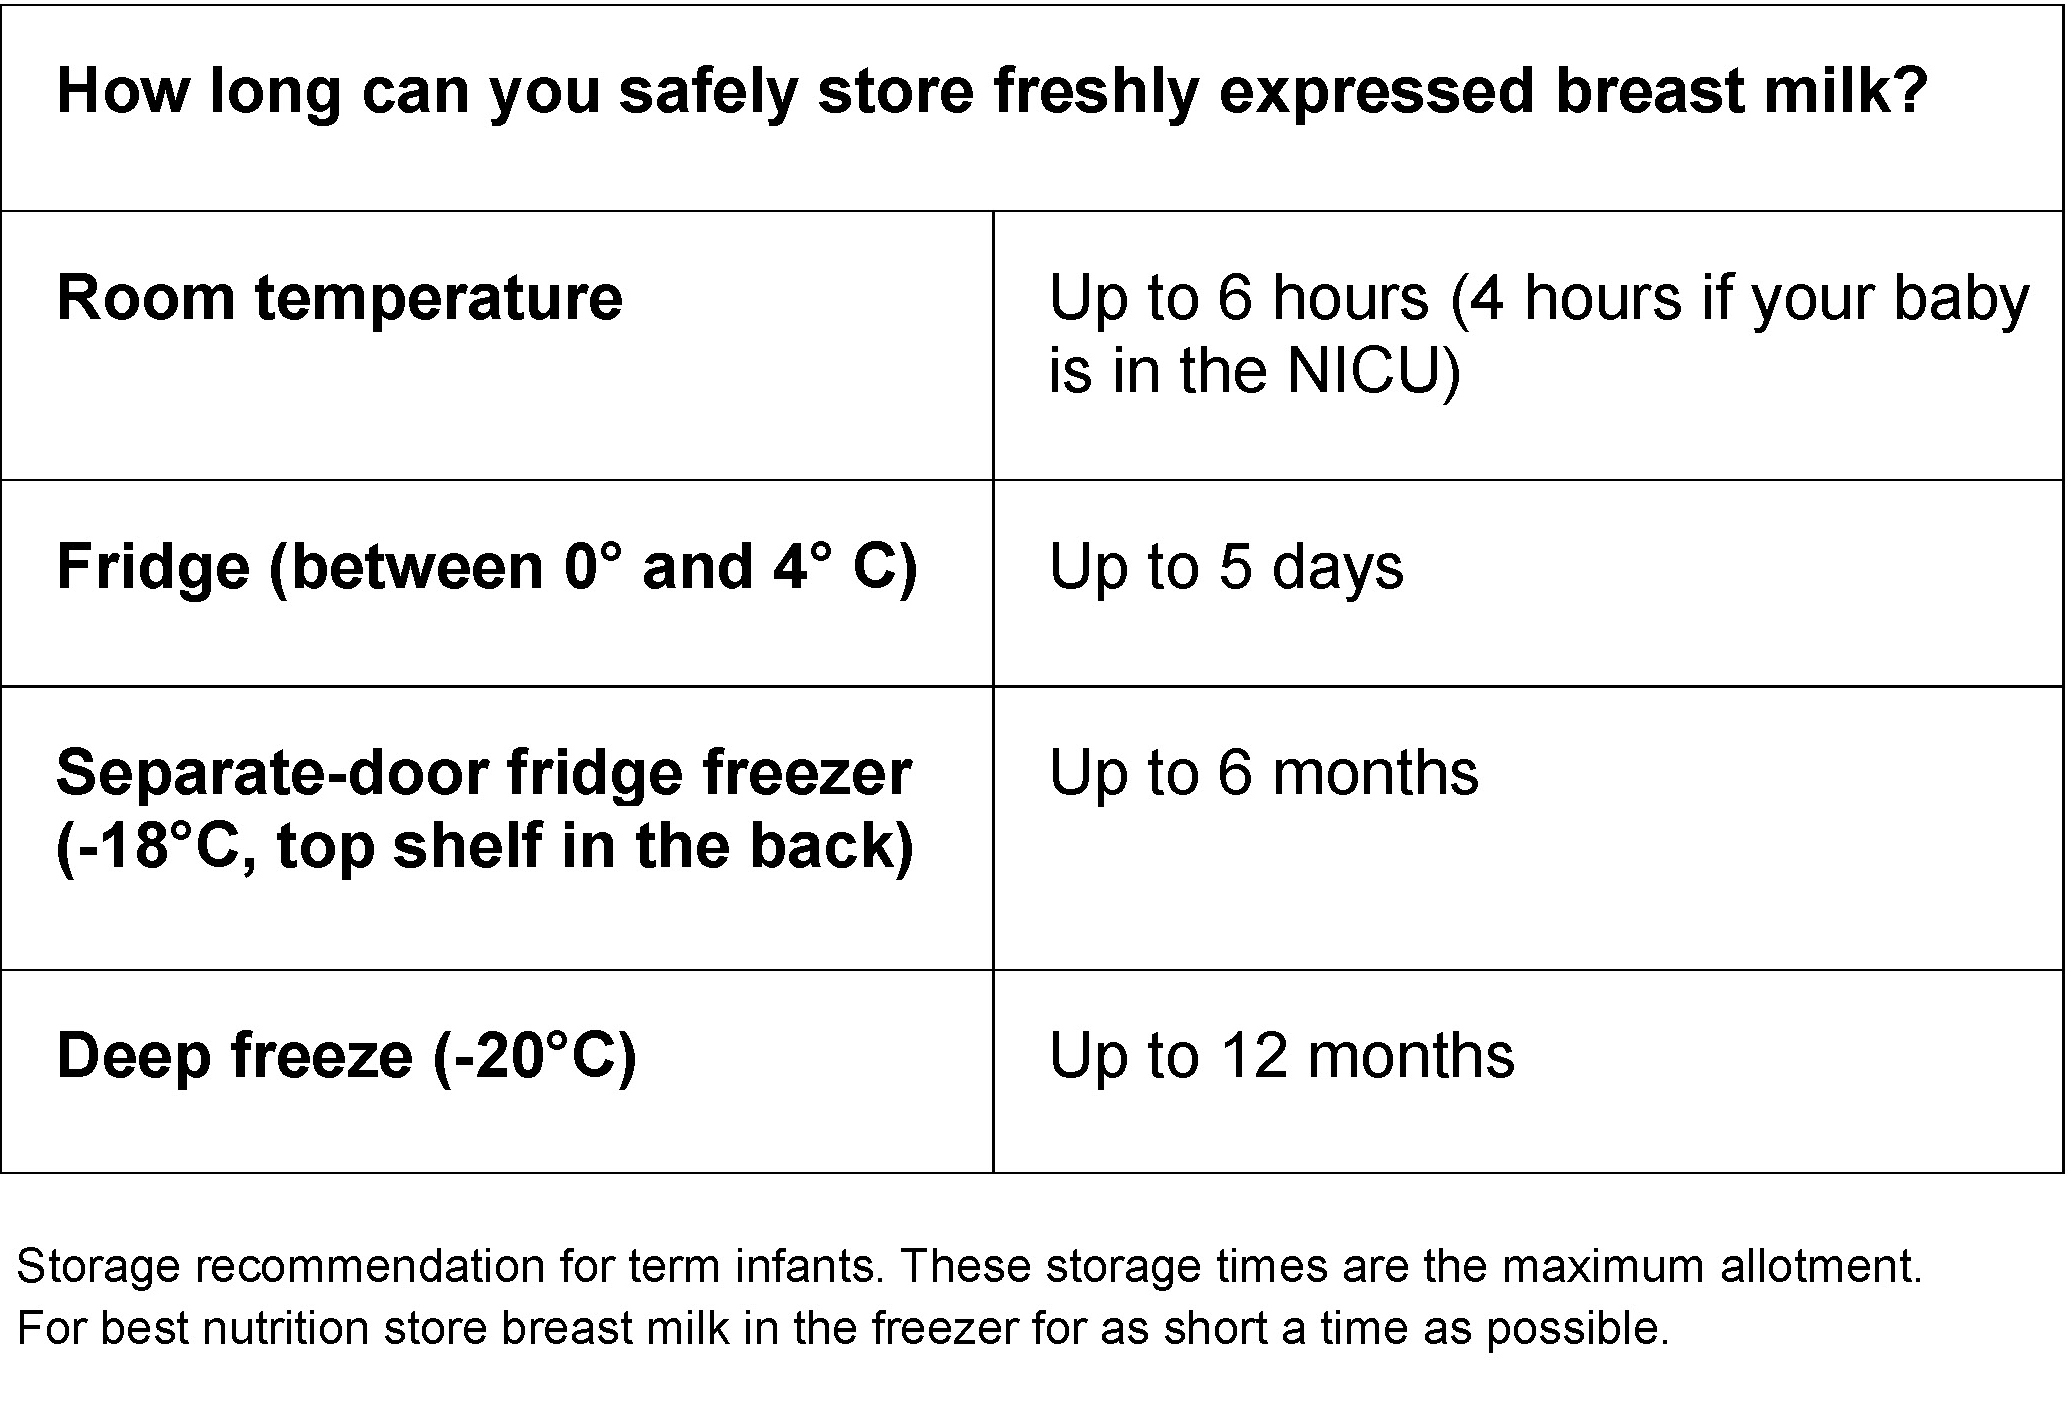 http://www.bcwomens.ca/Healthy-Living-Site/PublishingImages/health-info/pregnancy-parenting/breastfeeding-your-baby/expressing-breast-milk/Table%20-%20How%20Long%20Can%20You%20Safely%20Store%20BM.jpg